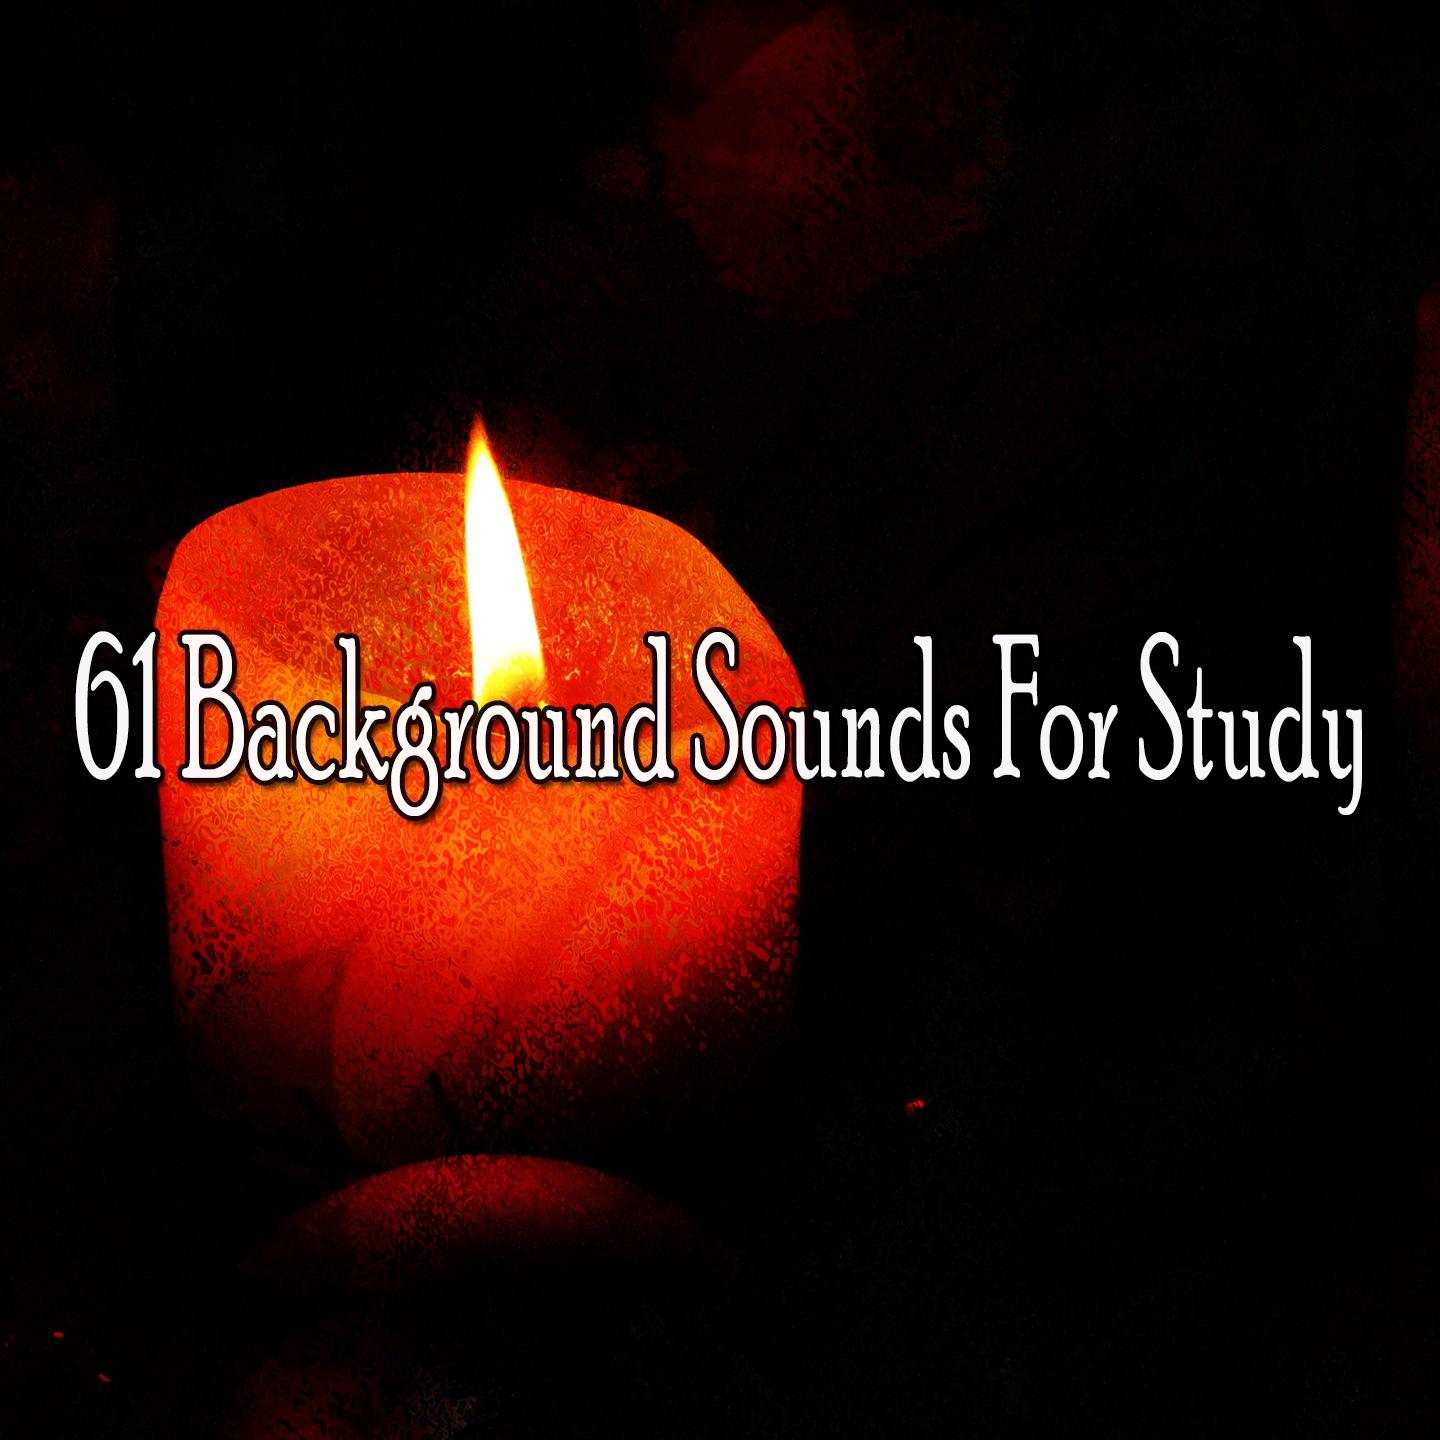 61 Background Sounds for Study